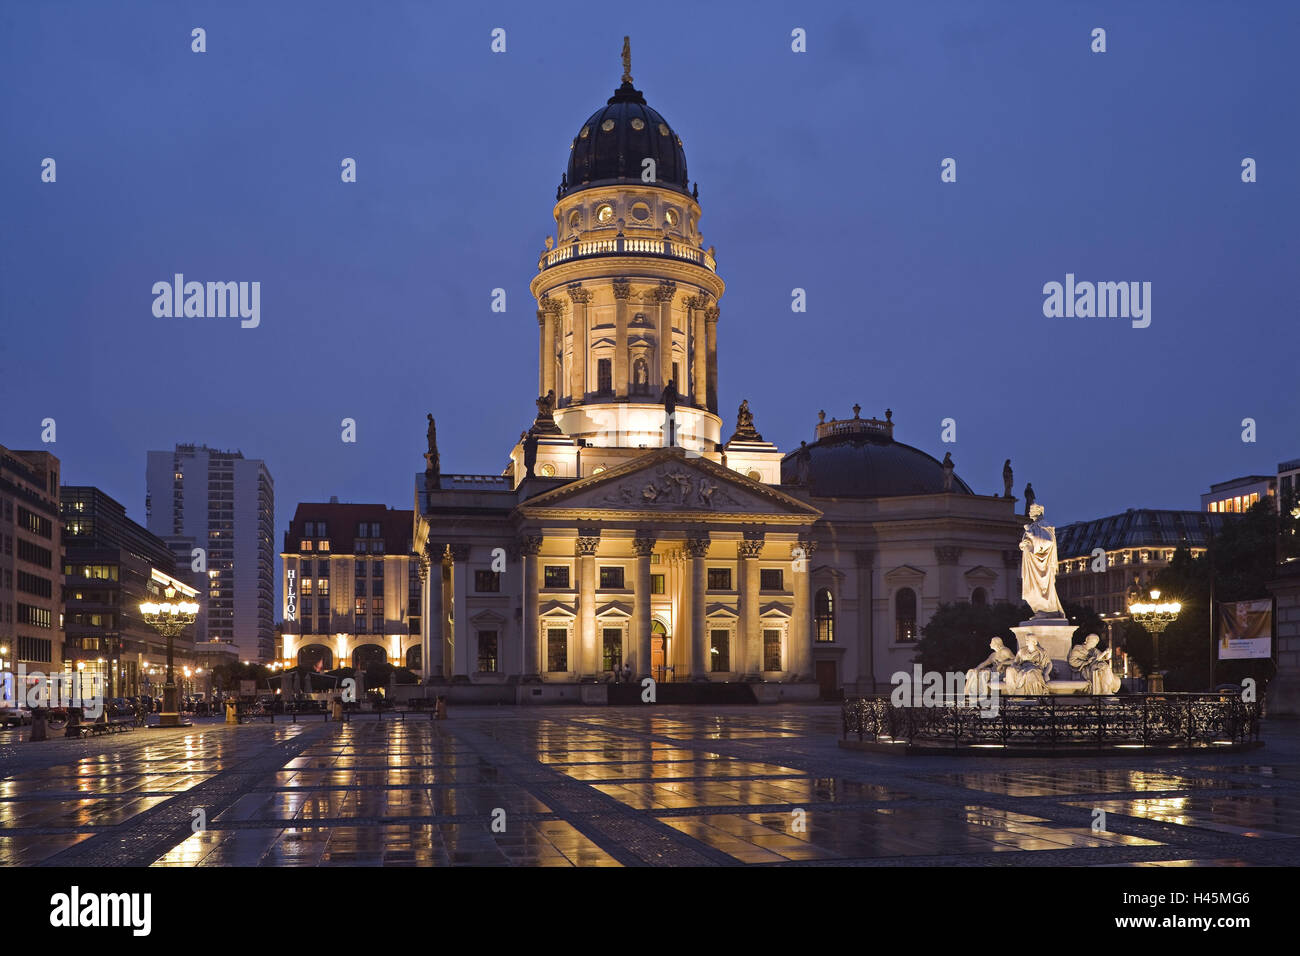 Germany, Berlin, gendarme's market, German cathedral, lighting, evening, Europe, town, capital, dome tower, dome, pillars, statues, architecture, landmark, tourism, place of interest, heaven, blue, building, space, night, culture, tower, architecture, Fri Stock Photo